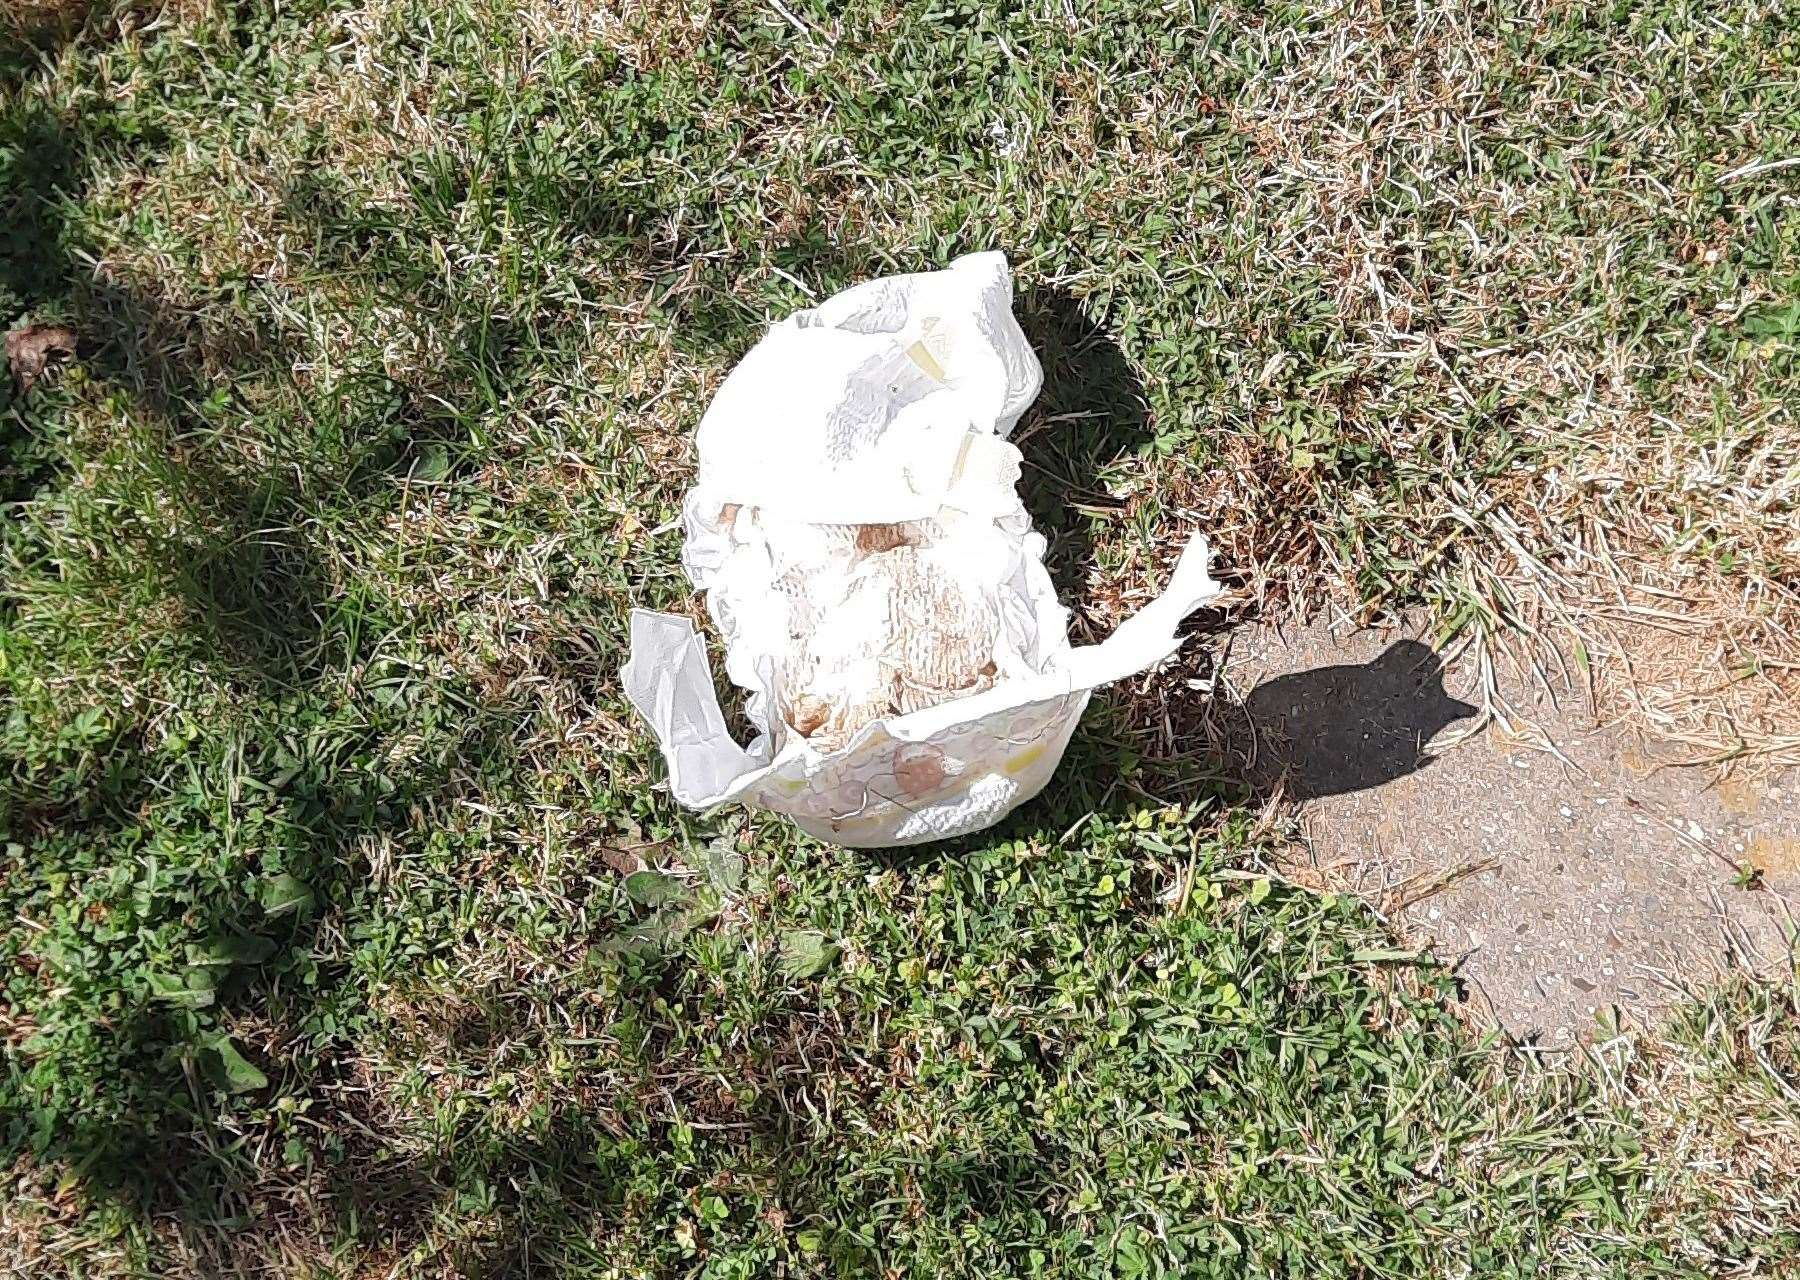 One resident said the group had dumped soiled nappies into their garden